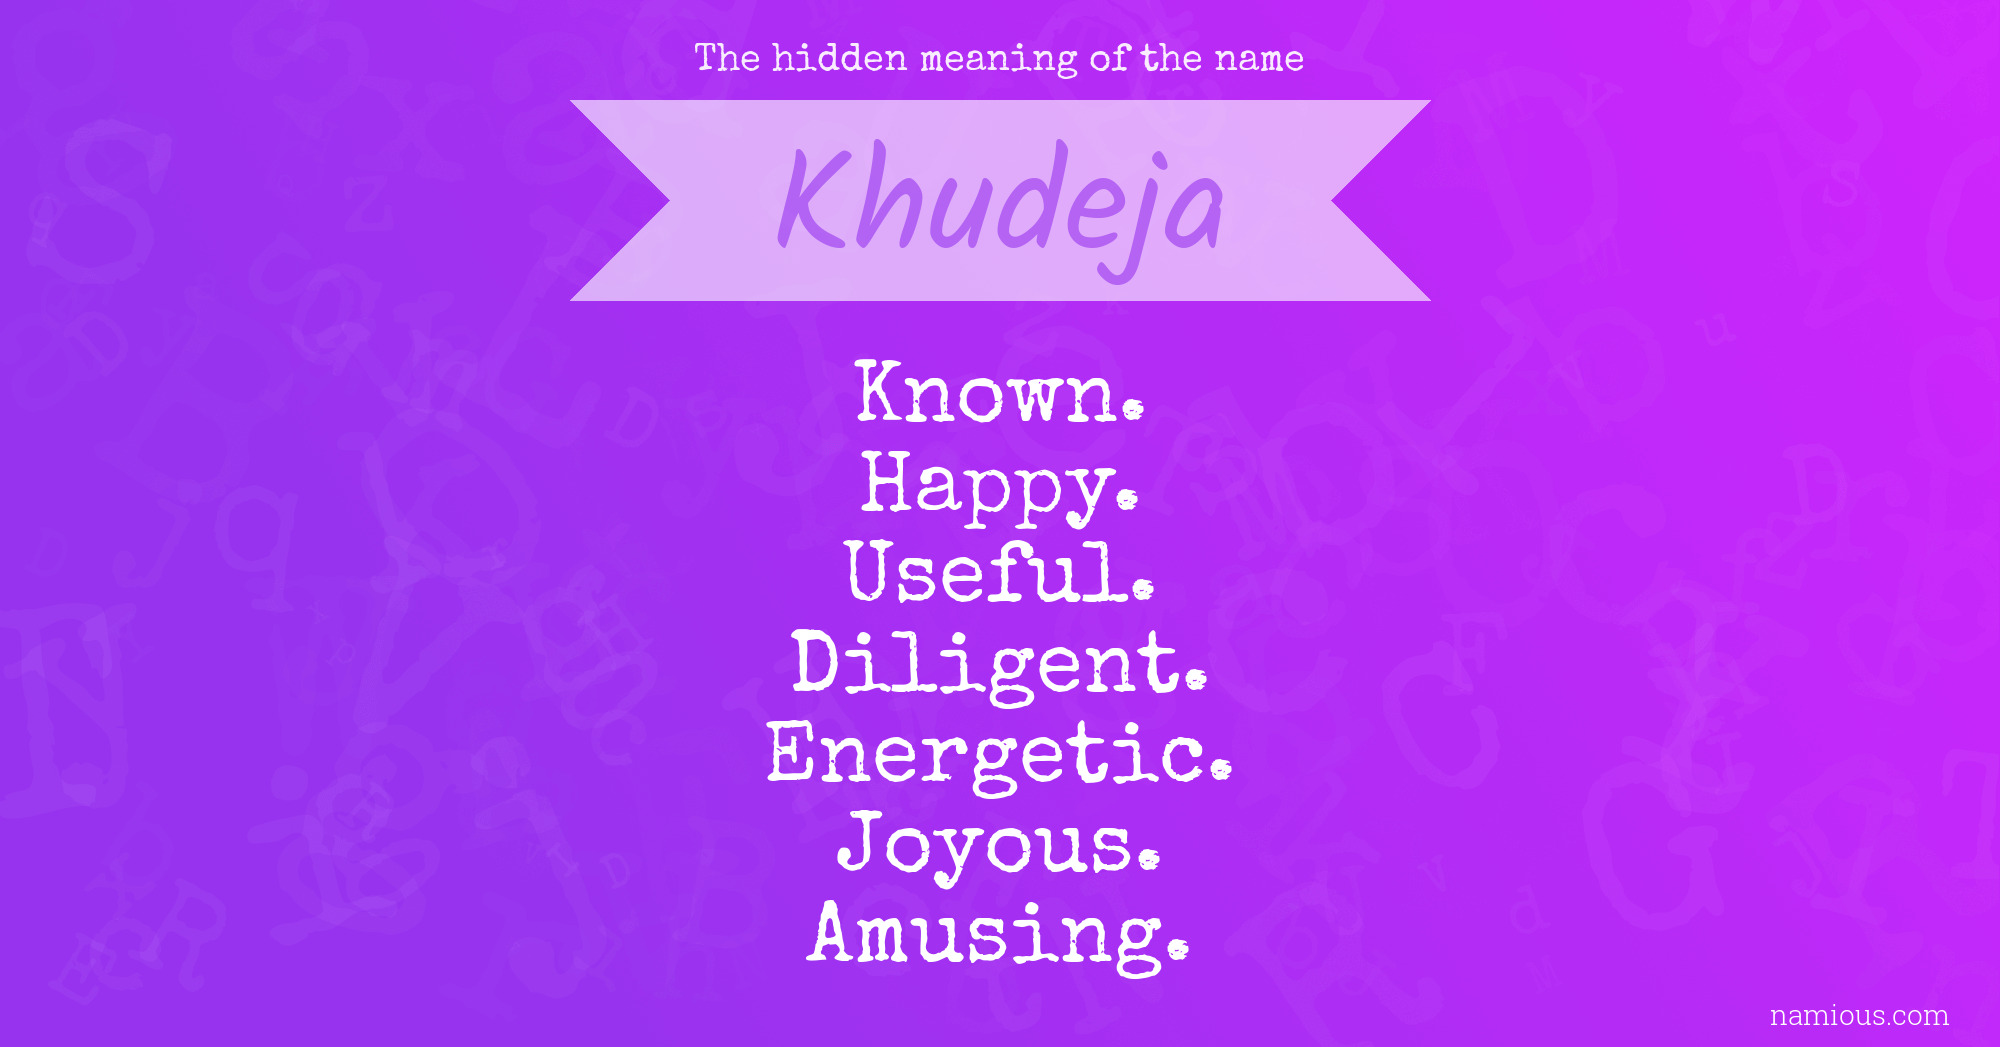 The hidden meaning of the name Khudeja